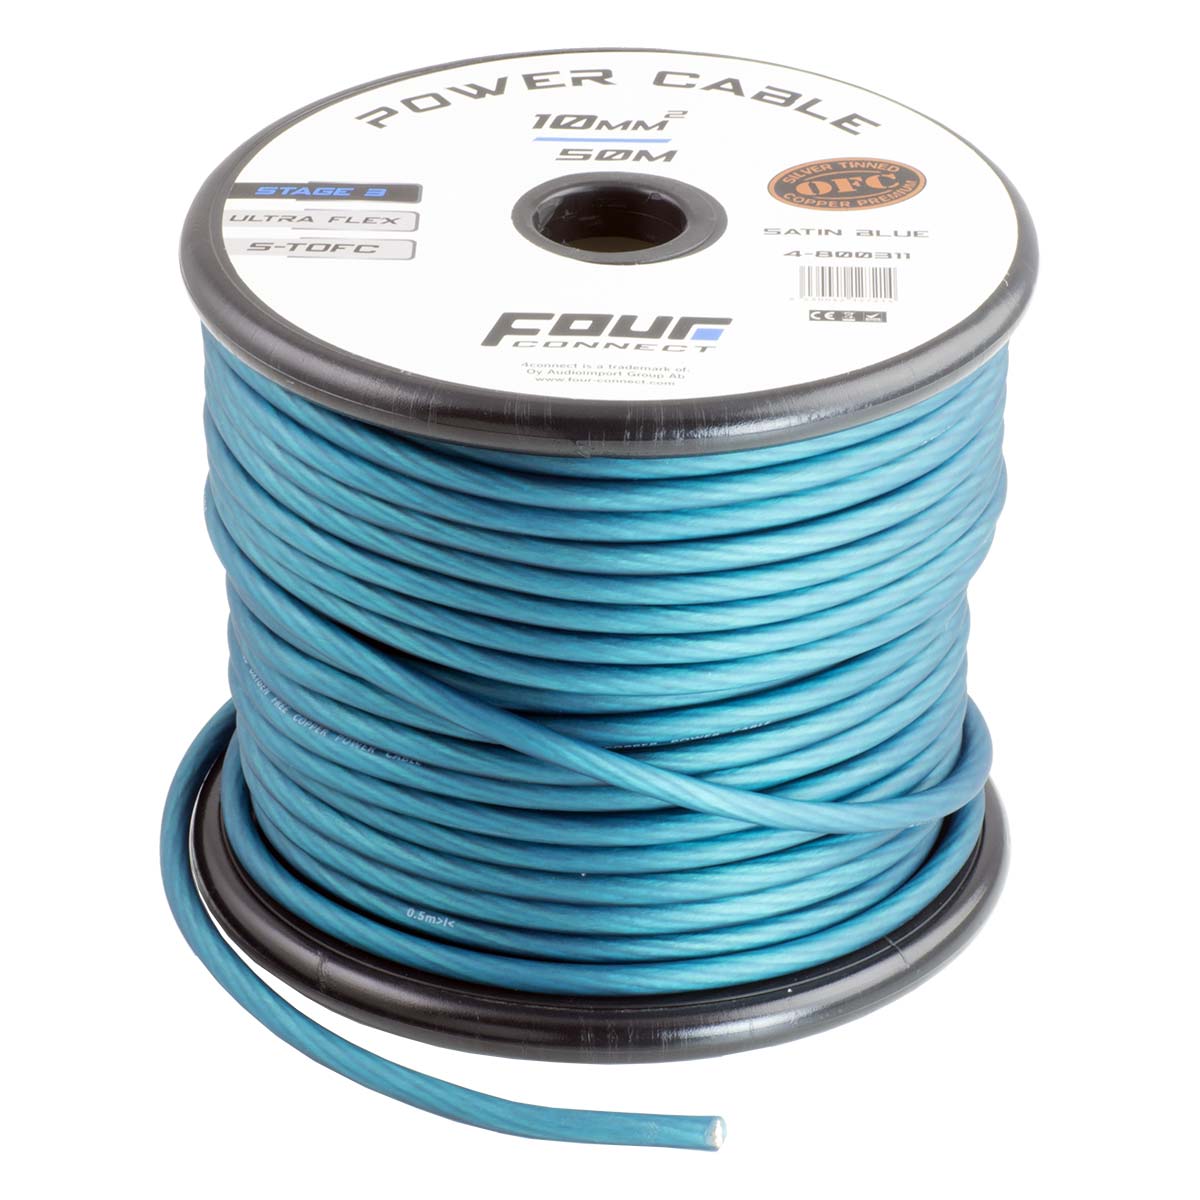 FOUR Connect 4-800311 STAGE3 10mm2 Satin Blue S-TOFC power cable, 50 meters